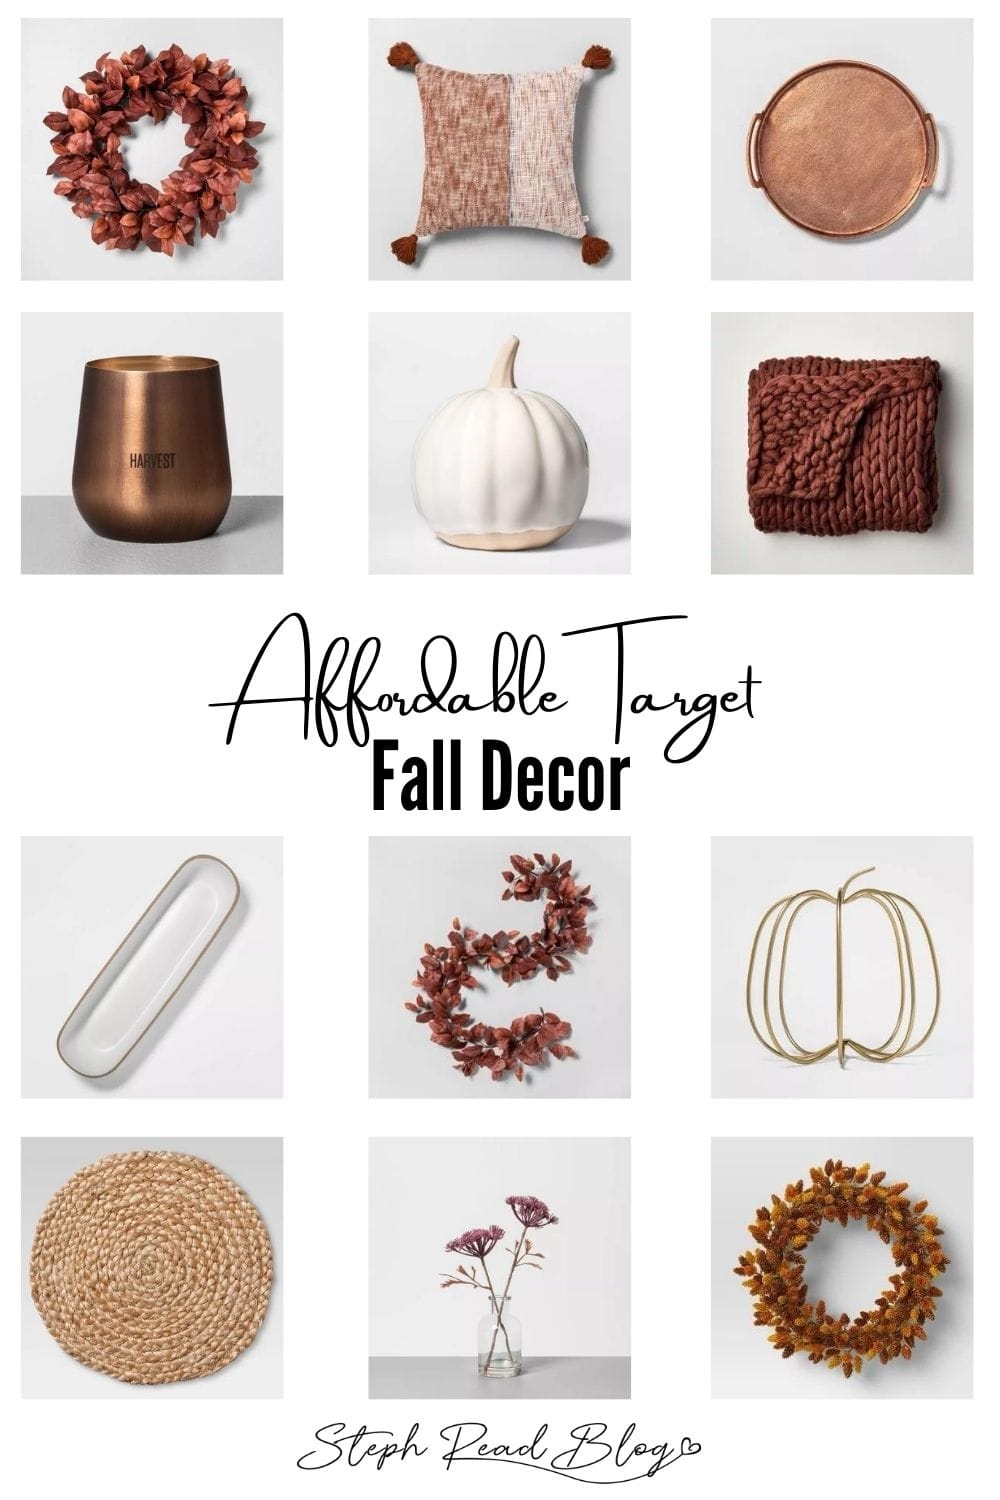 Affordable Target Fall Decor that you need this year! - Steph Read Blog